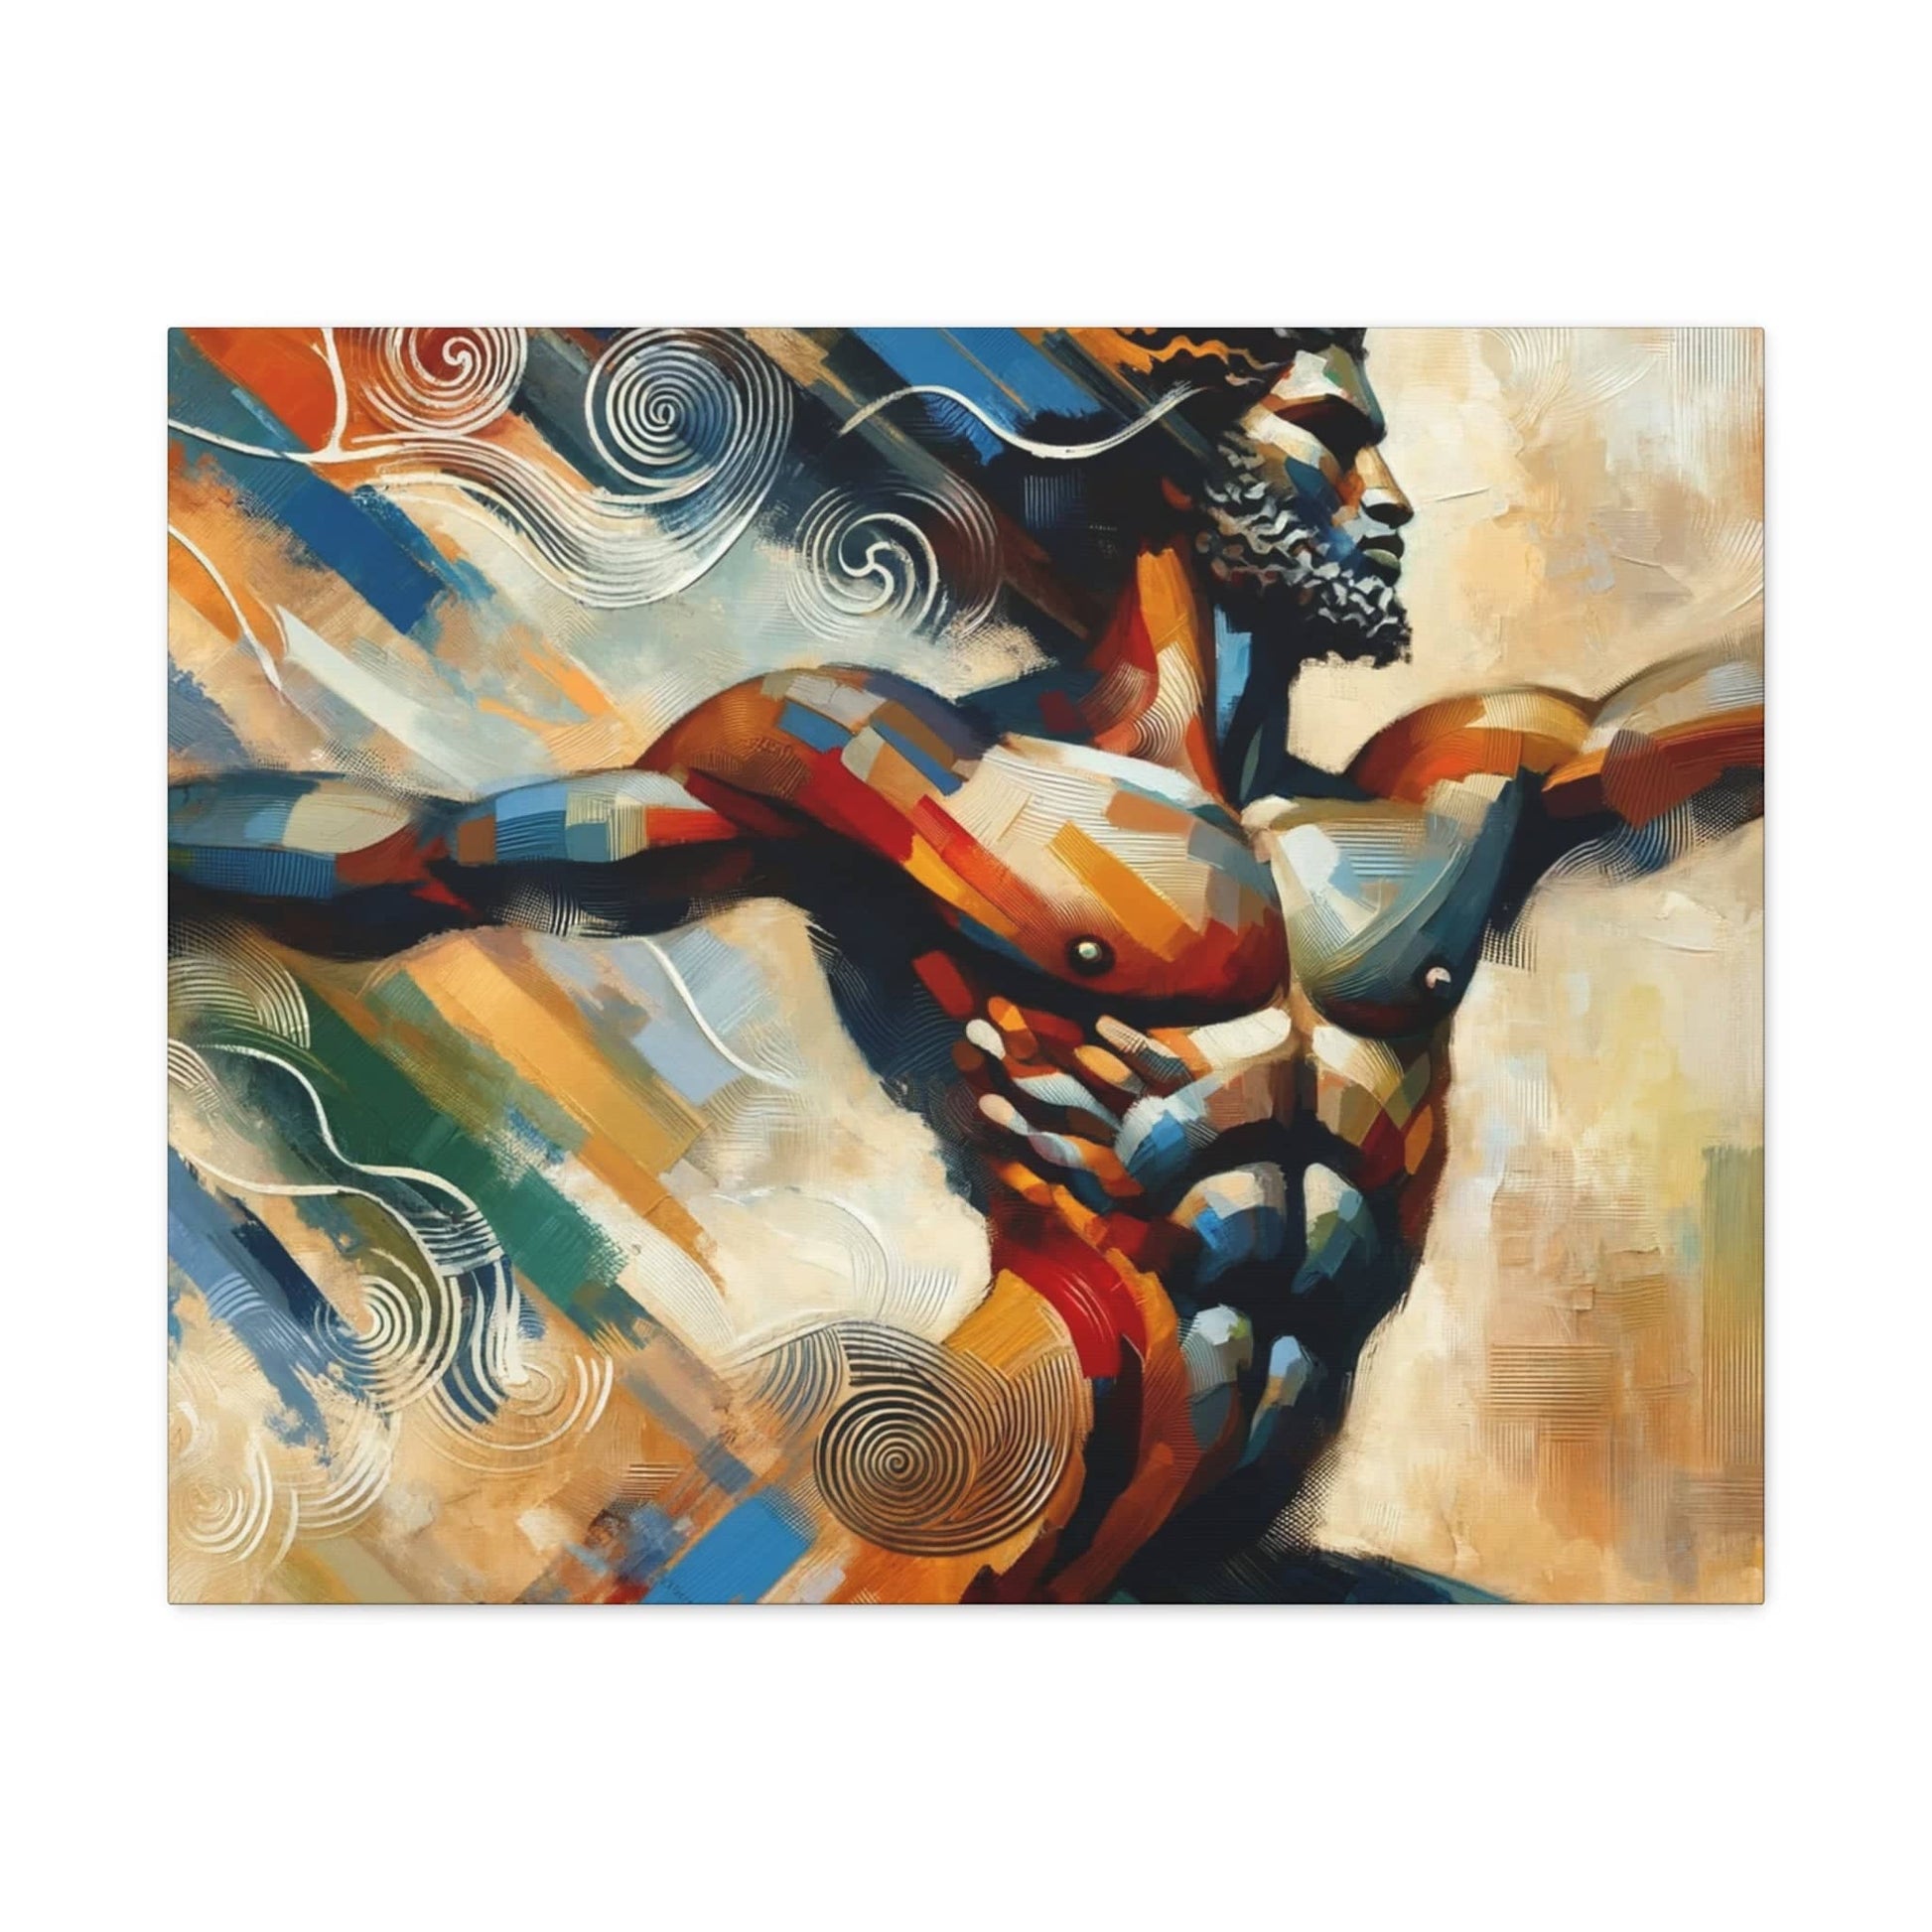 A Printify Whirlwind Warrior Canvas Art captured in abstract canvas art.